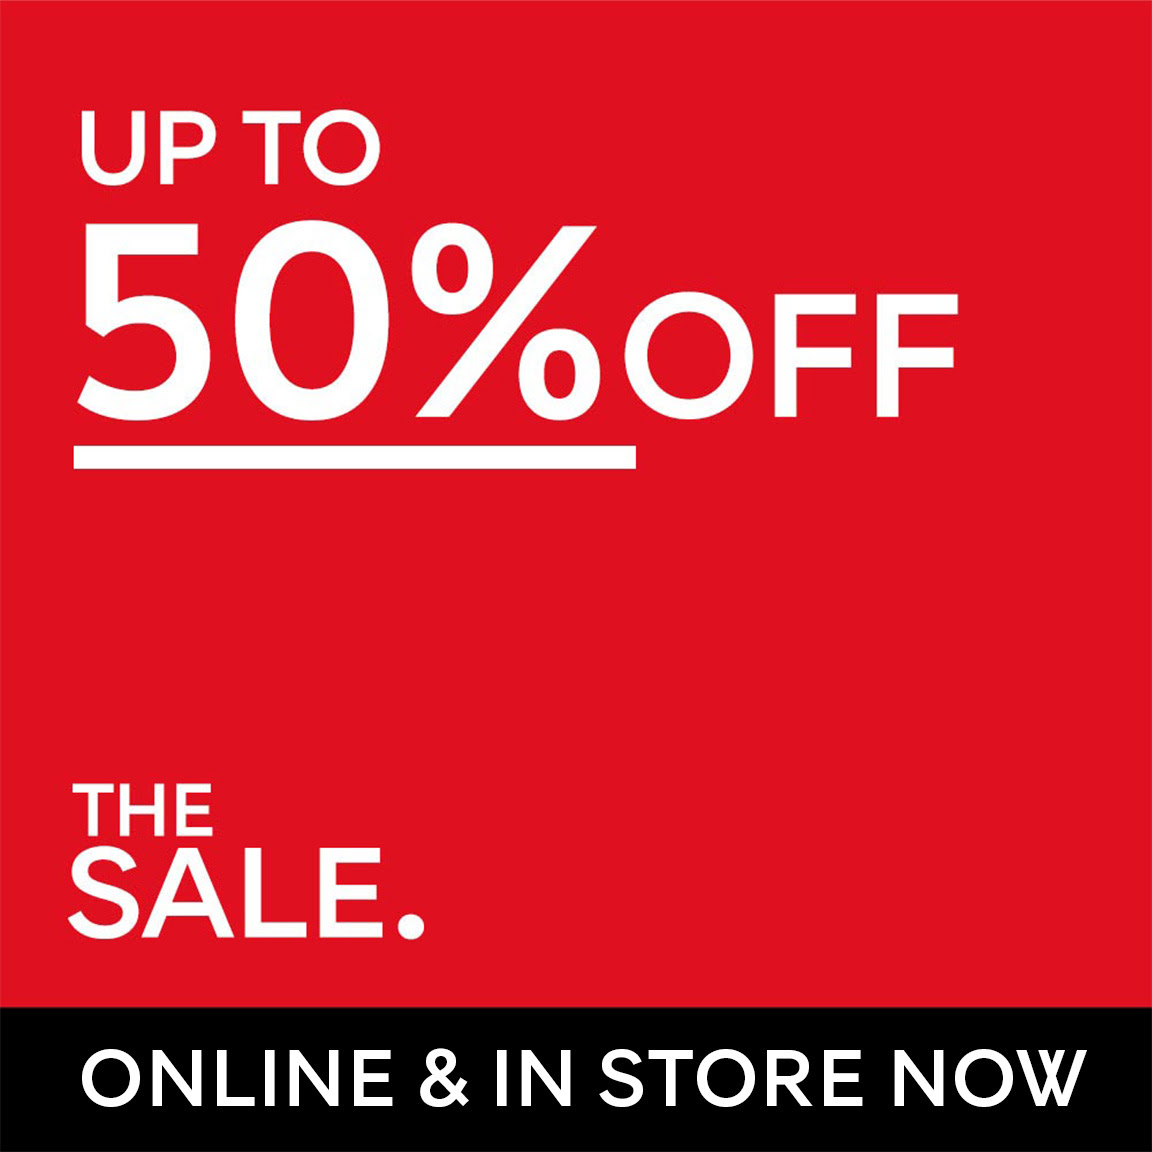 Enjoy up to 50% off in the sale